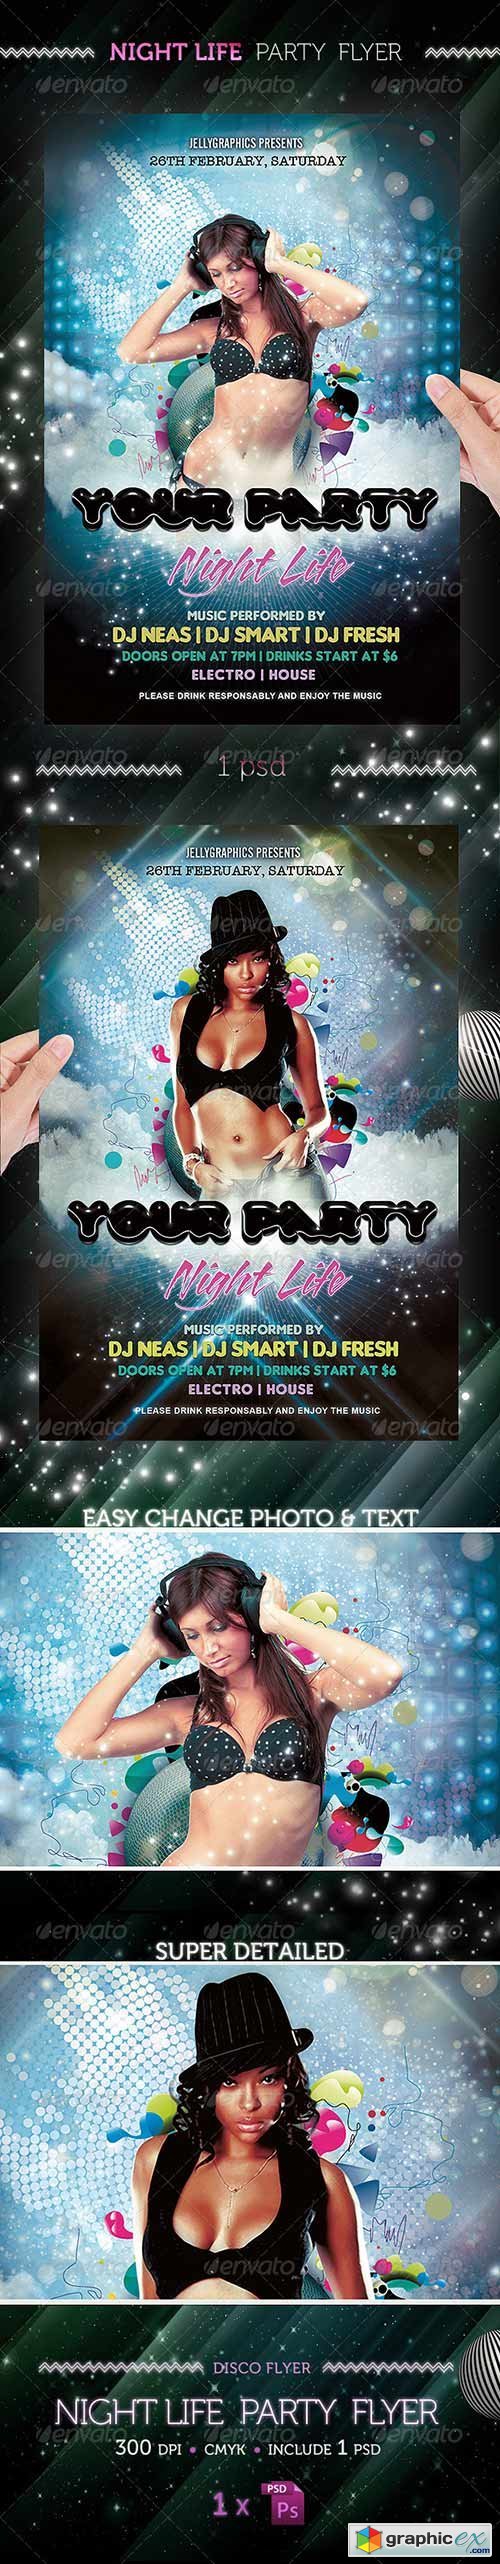 Nightlife Party Flyer Template